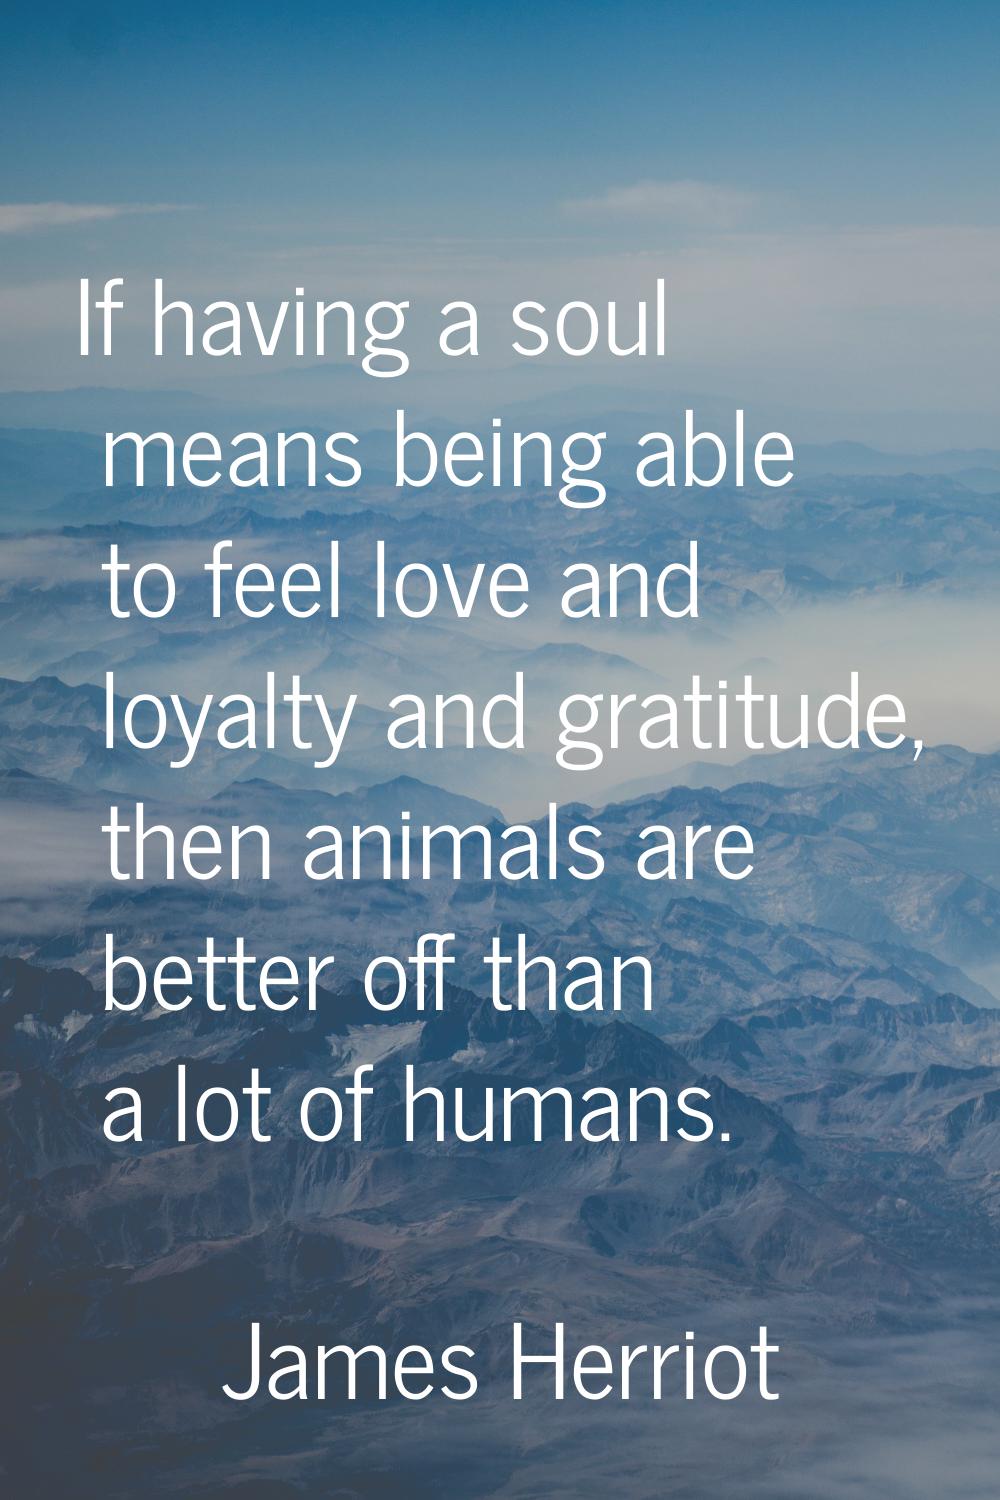 If having a soul means being able to feel love and loyalty and gratitude, then animals are better o